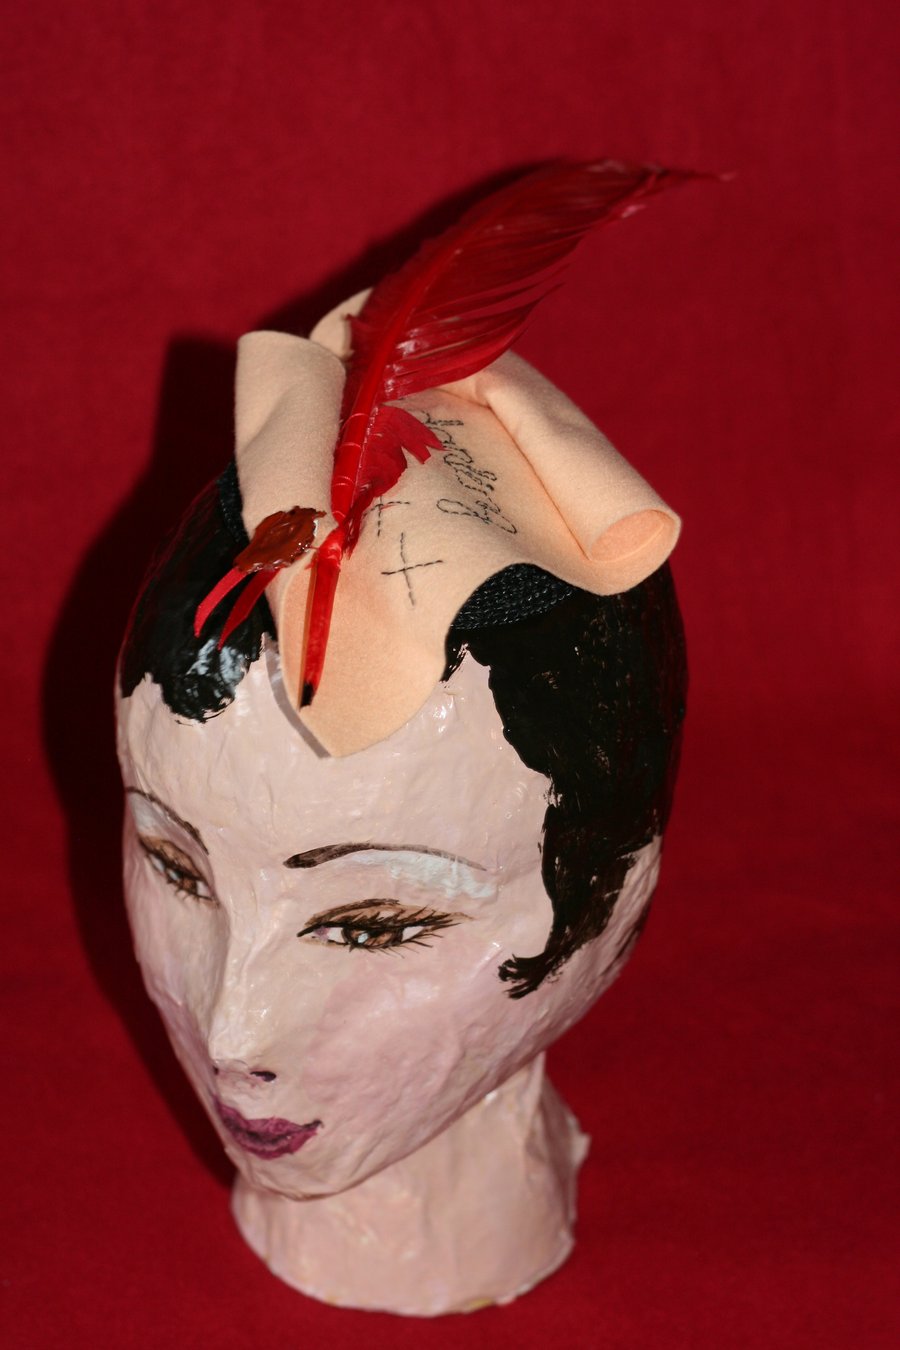 Felt and feather love letter fascinator